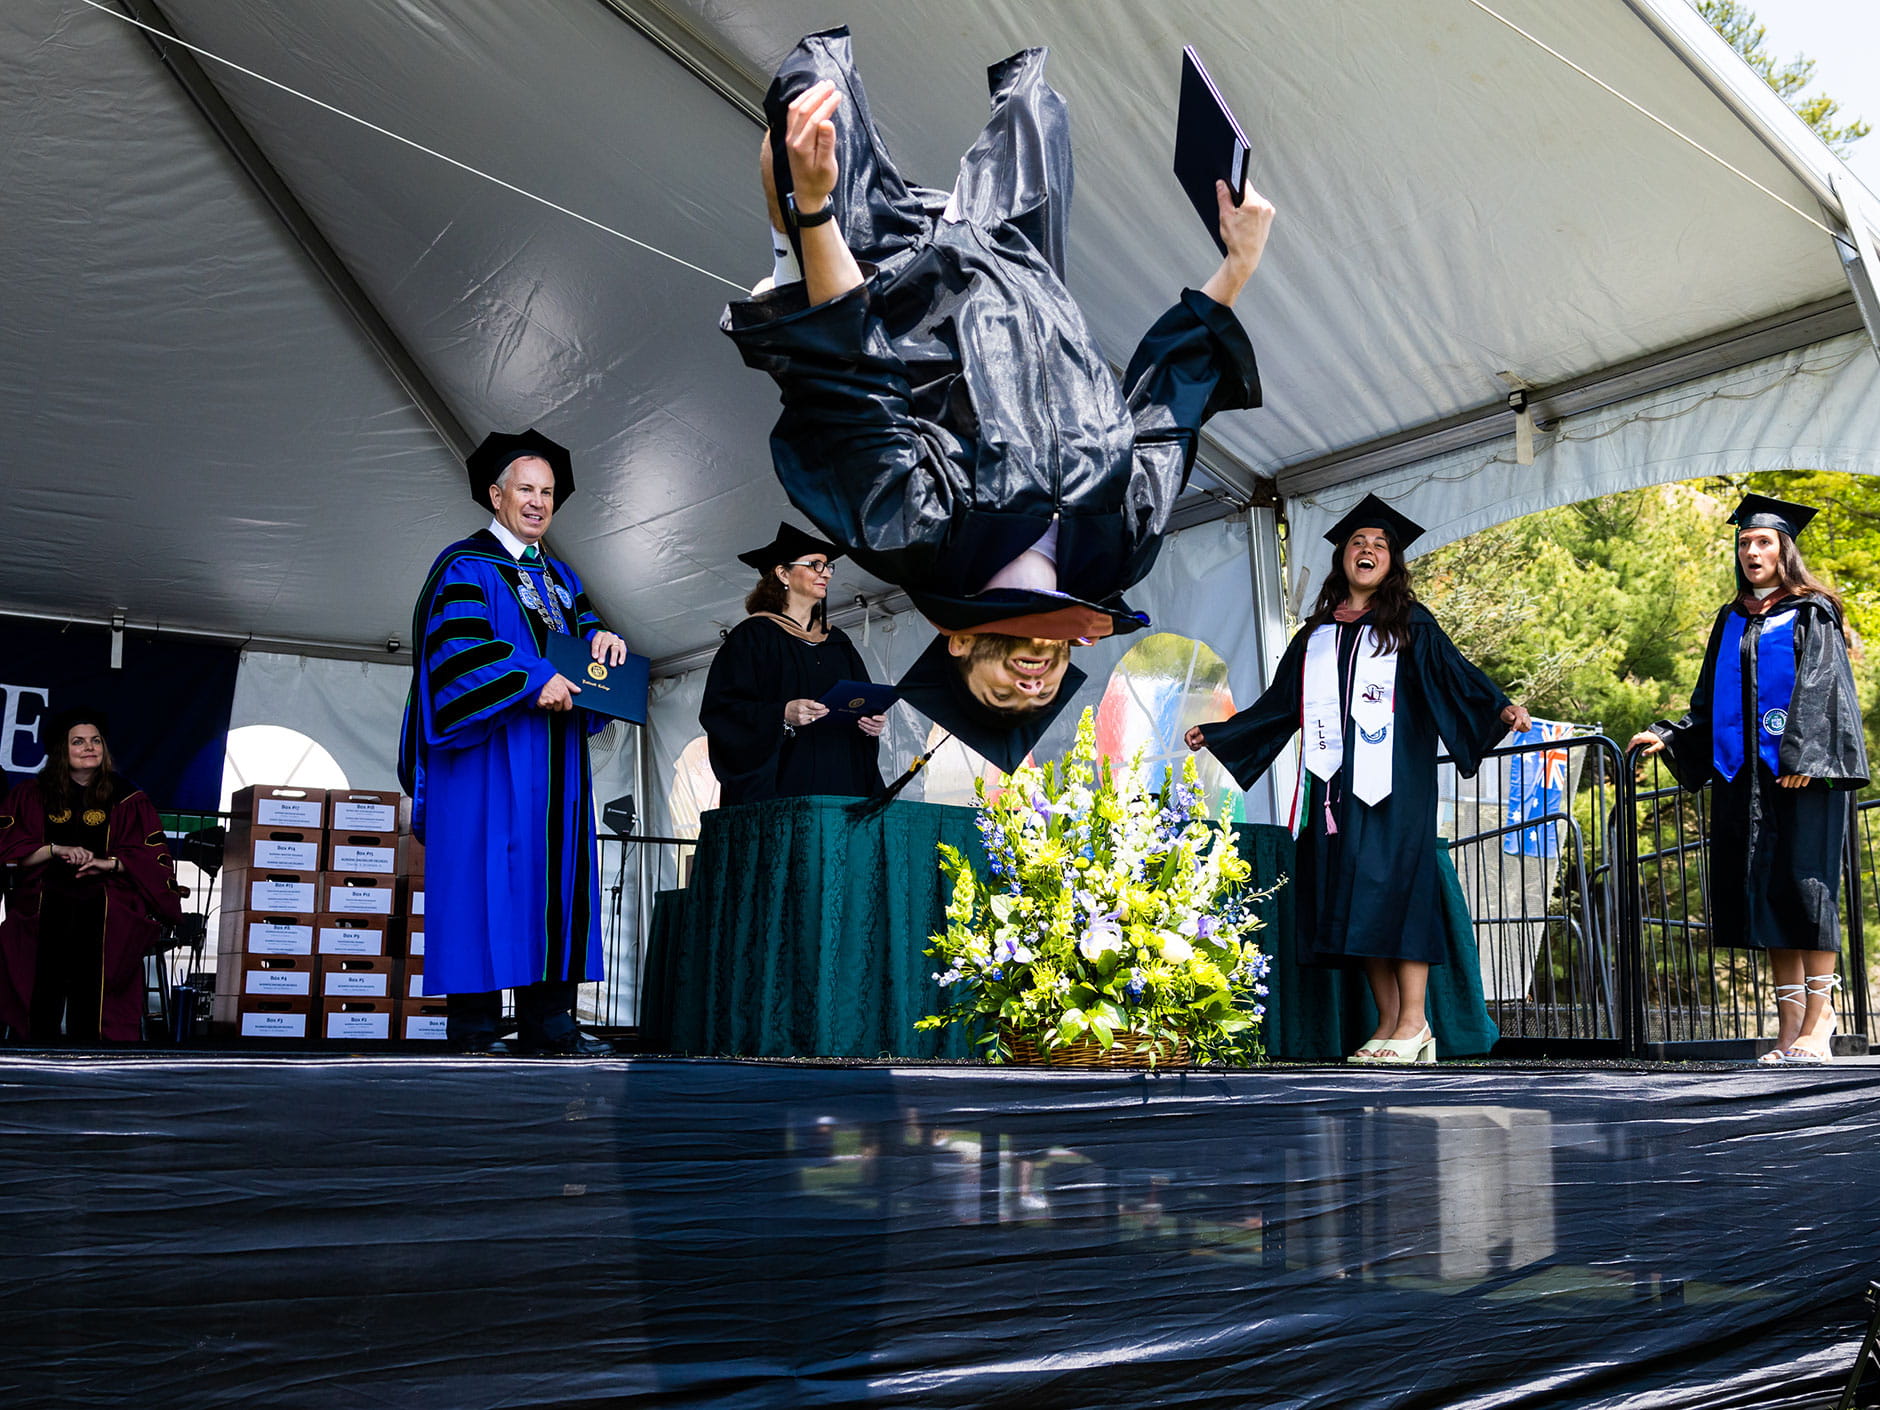 A student jumps off stage after receiving his degree